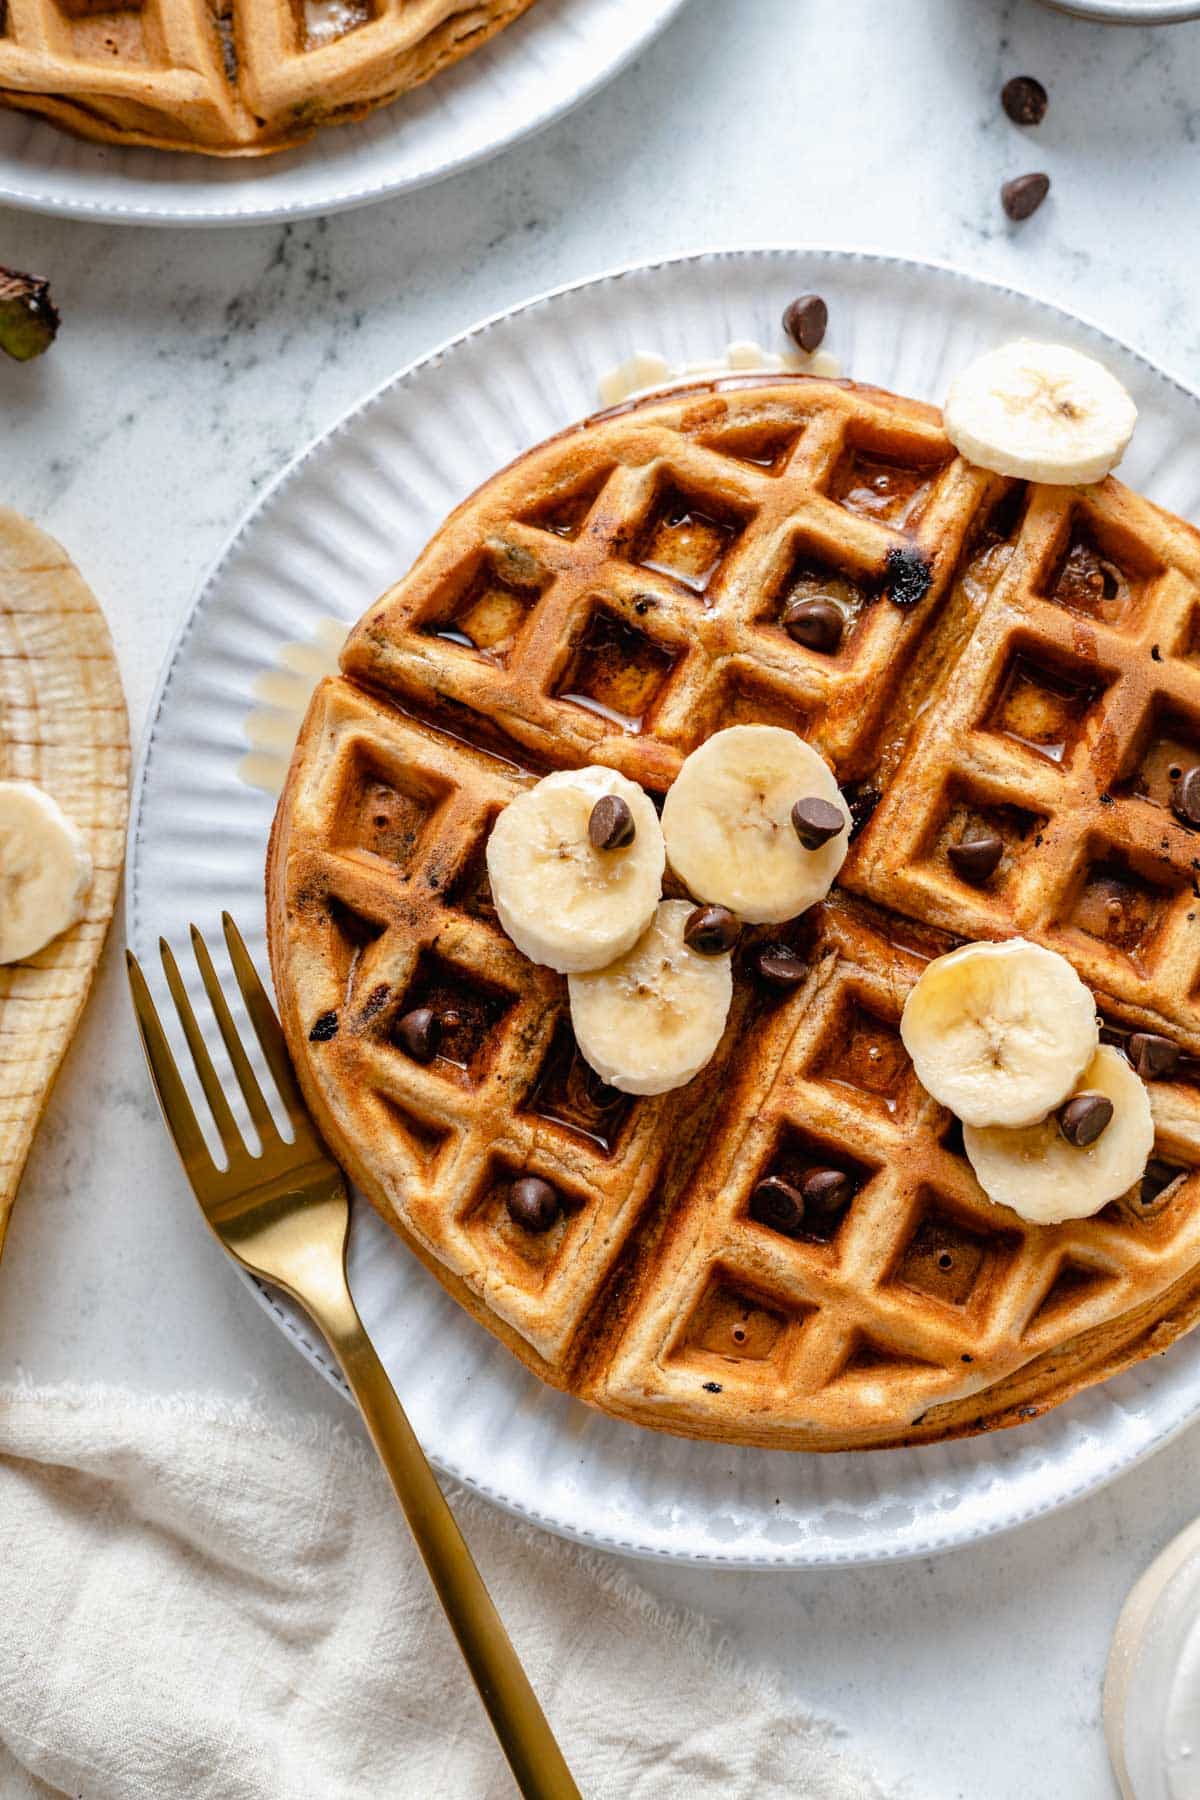 Banana waffles topped with chocolate chips, banana slices and maple syrup.